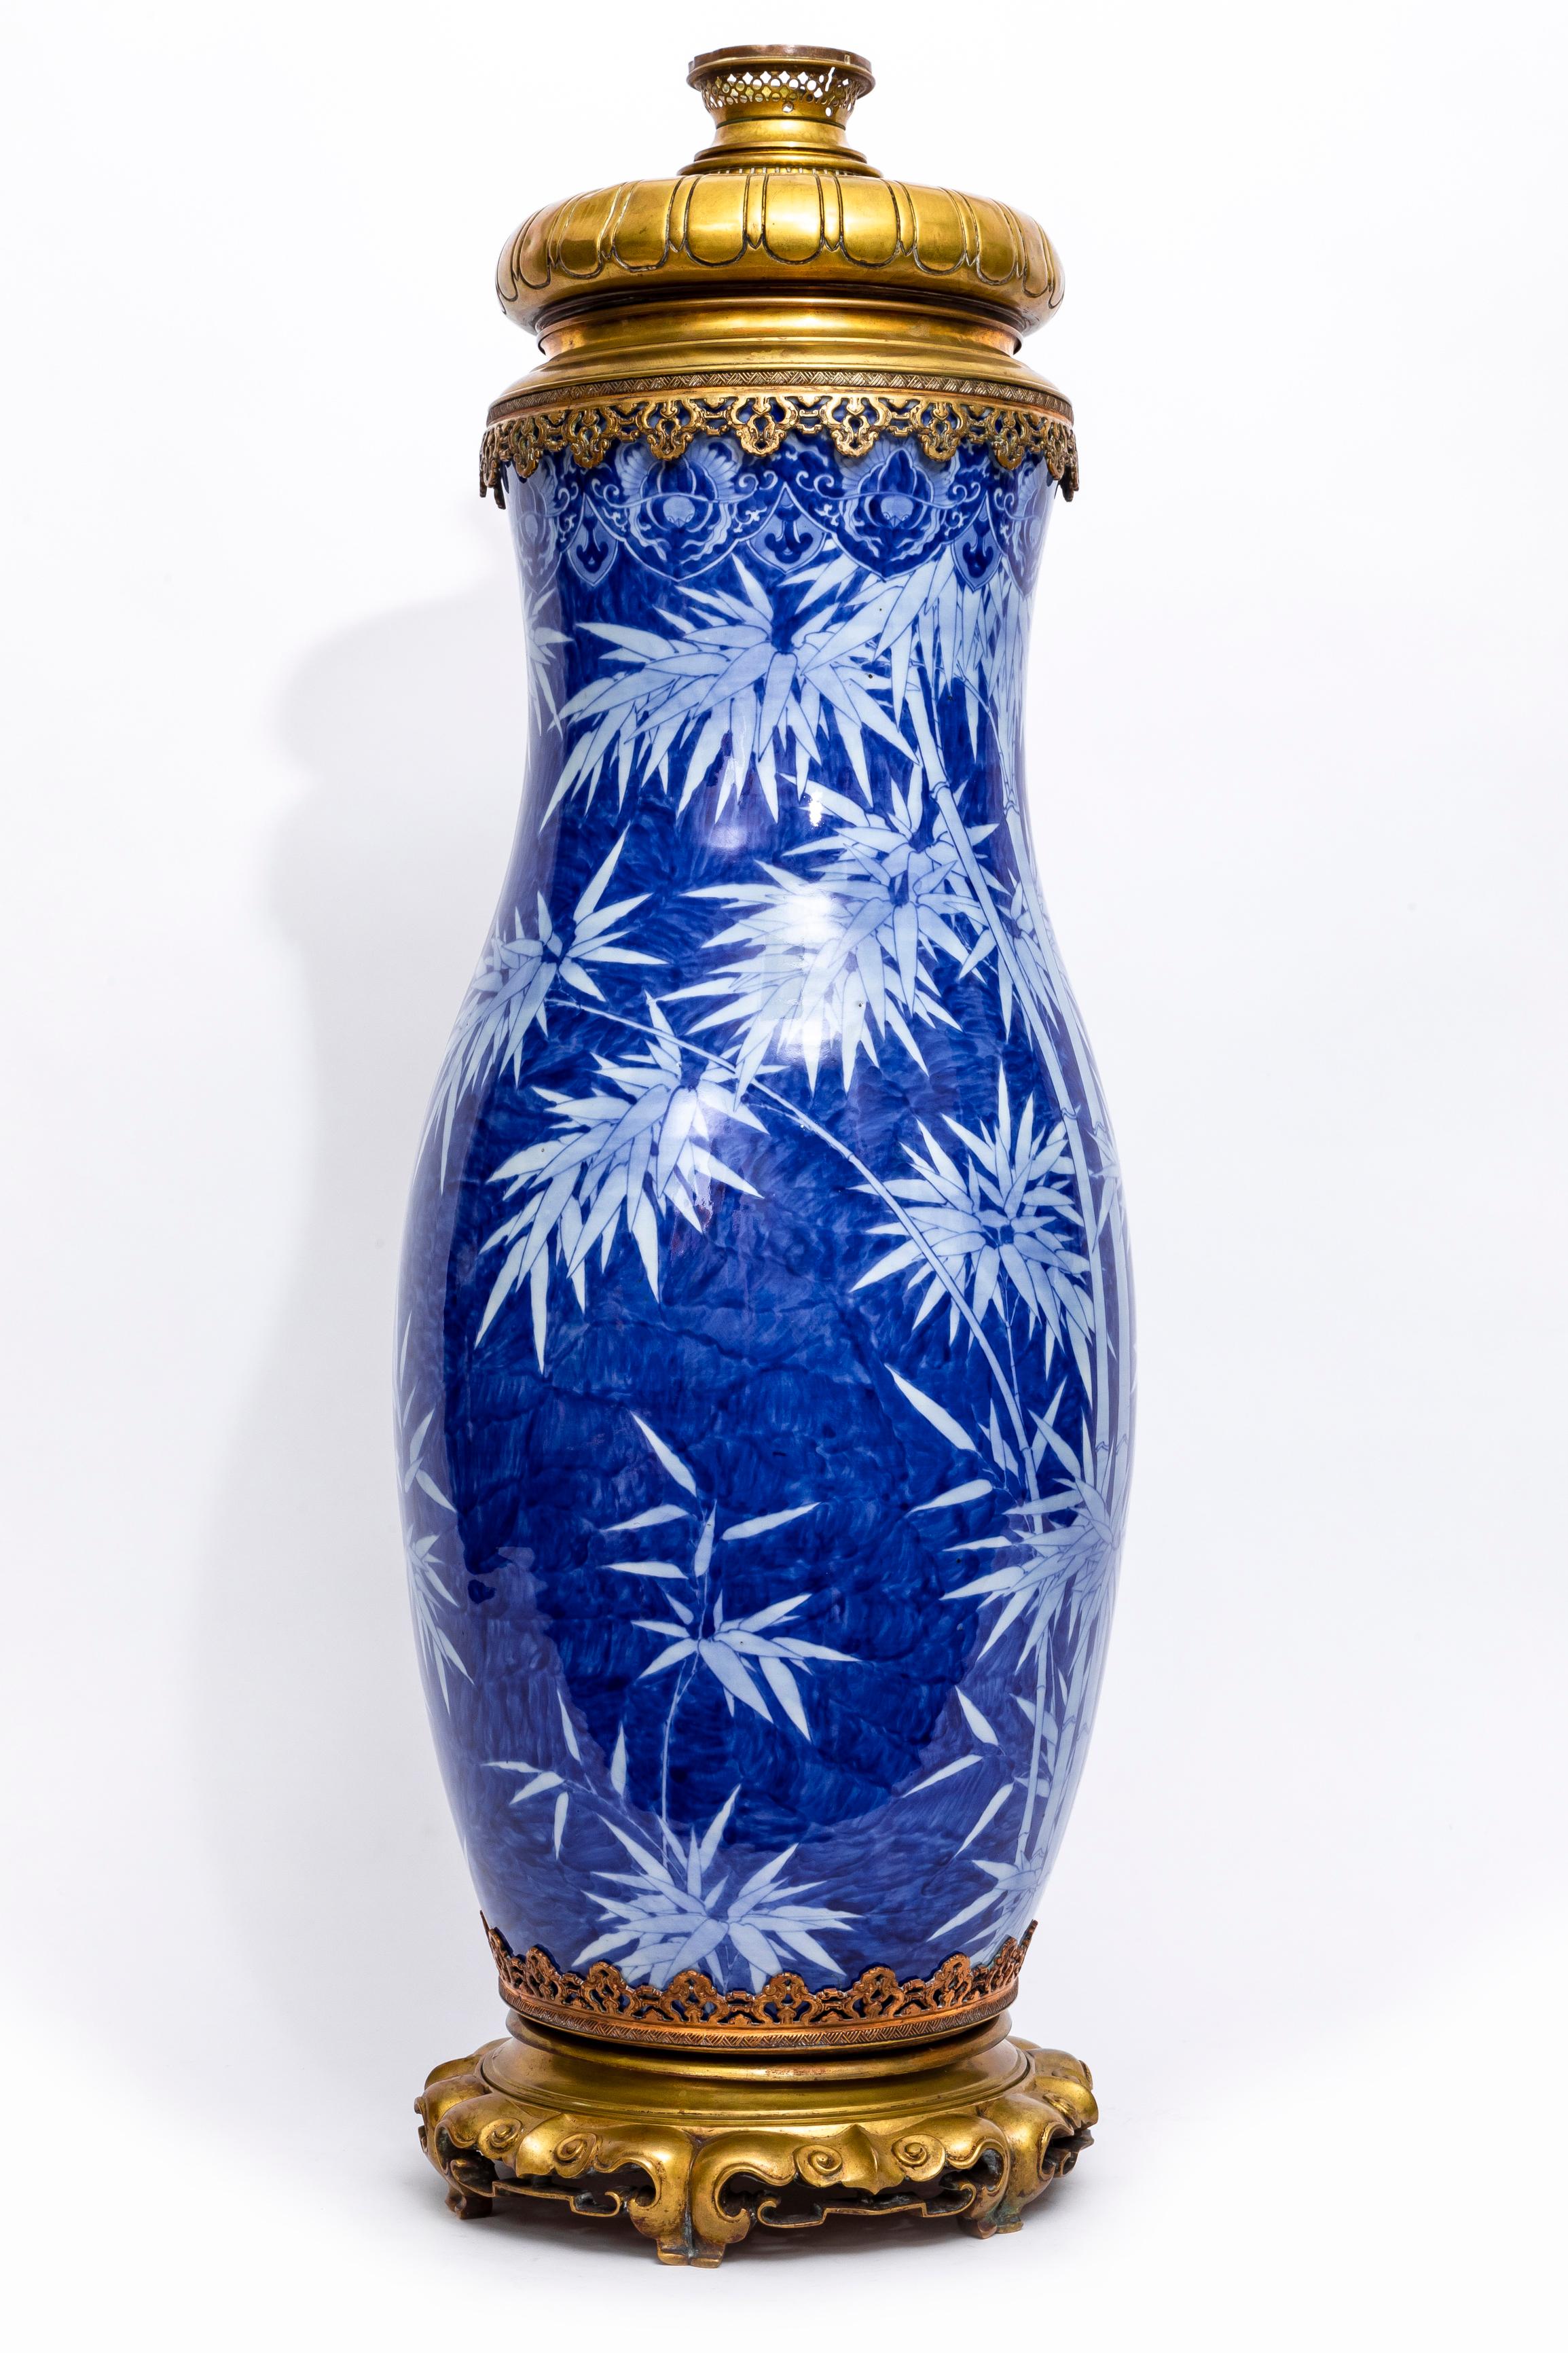 19th Century A Large French Ormolu Mounted Japanese Blue & White Porcelain Vase/Lamp For Sale